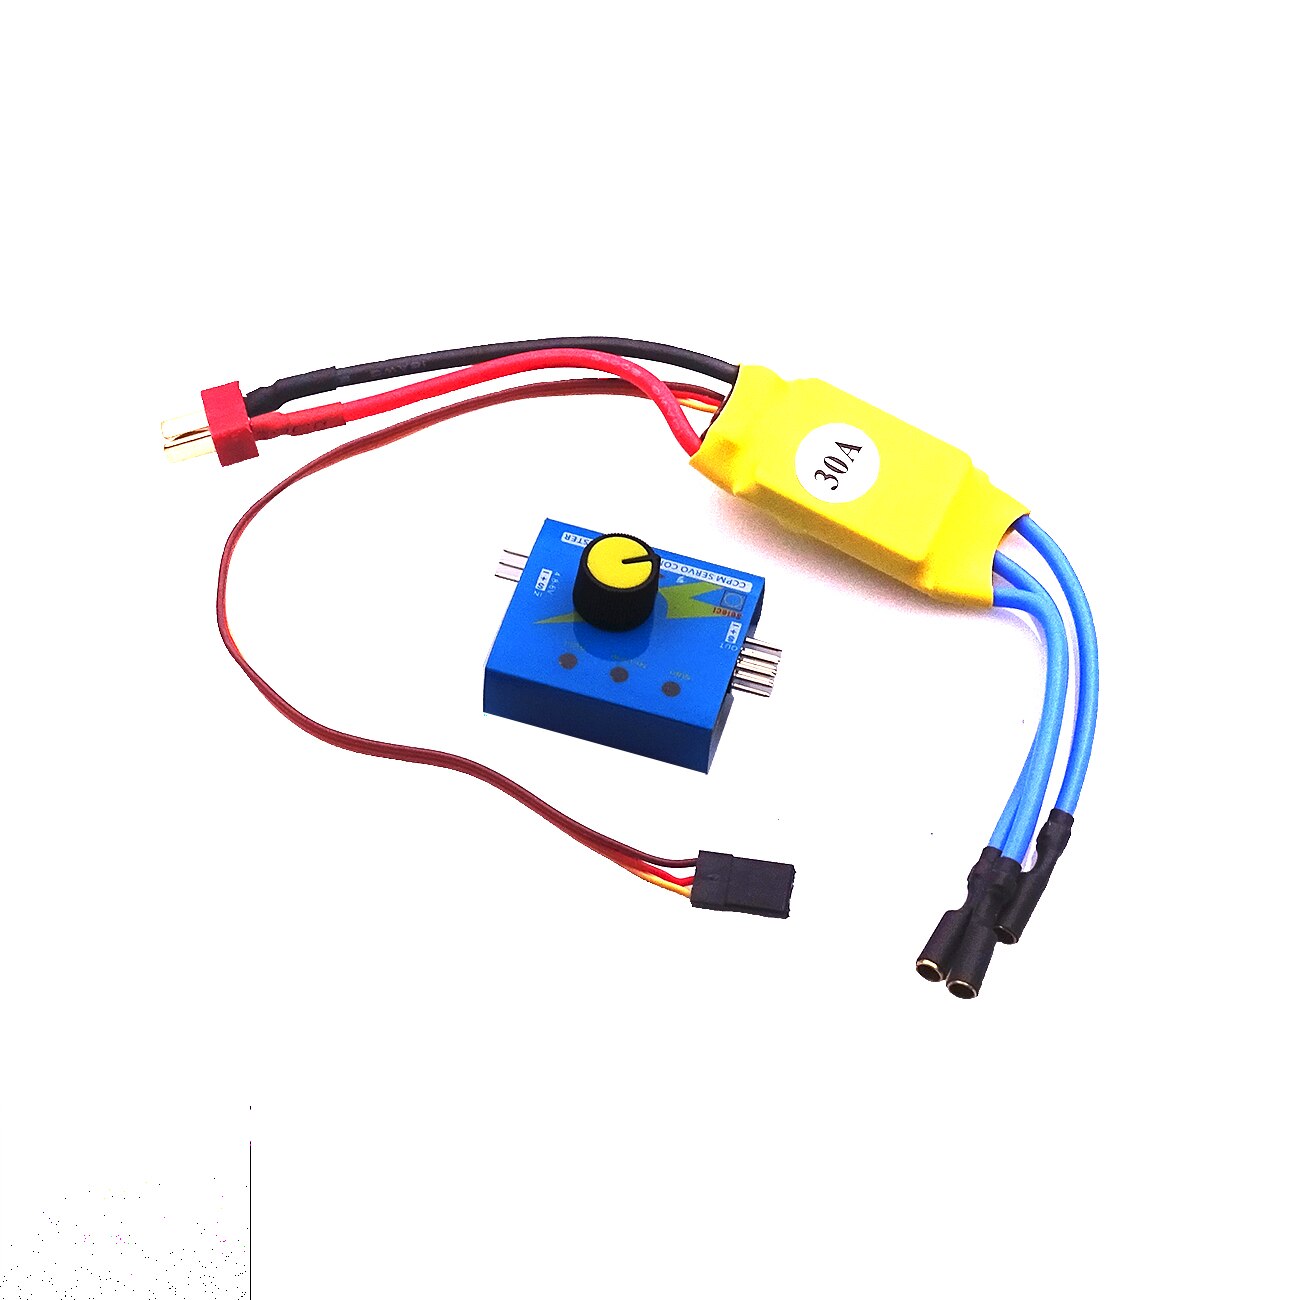 DC 12V 30A High-Power Brushless Motor Speed Controller DC 3-phase Regulator PWM Brushless Motor Speed Controller Drive: collocation